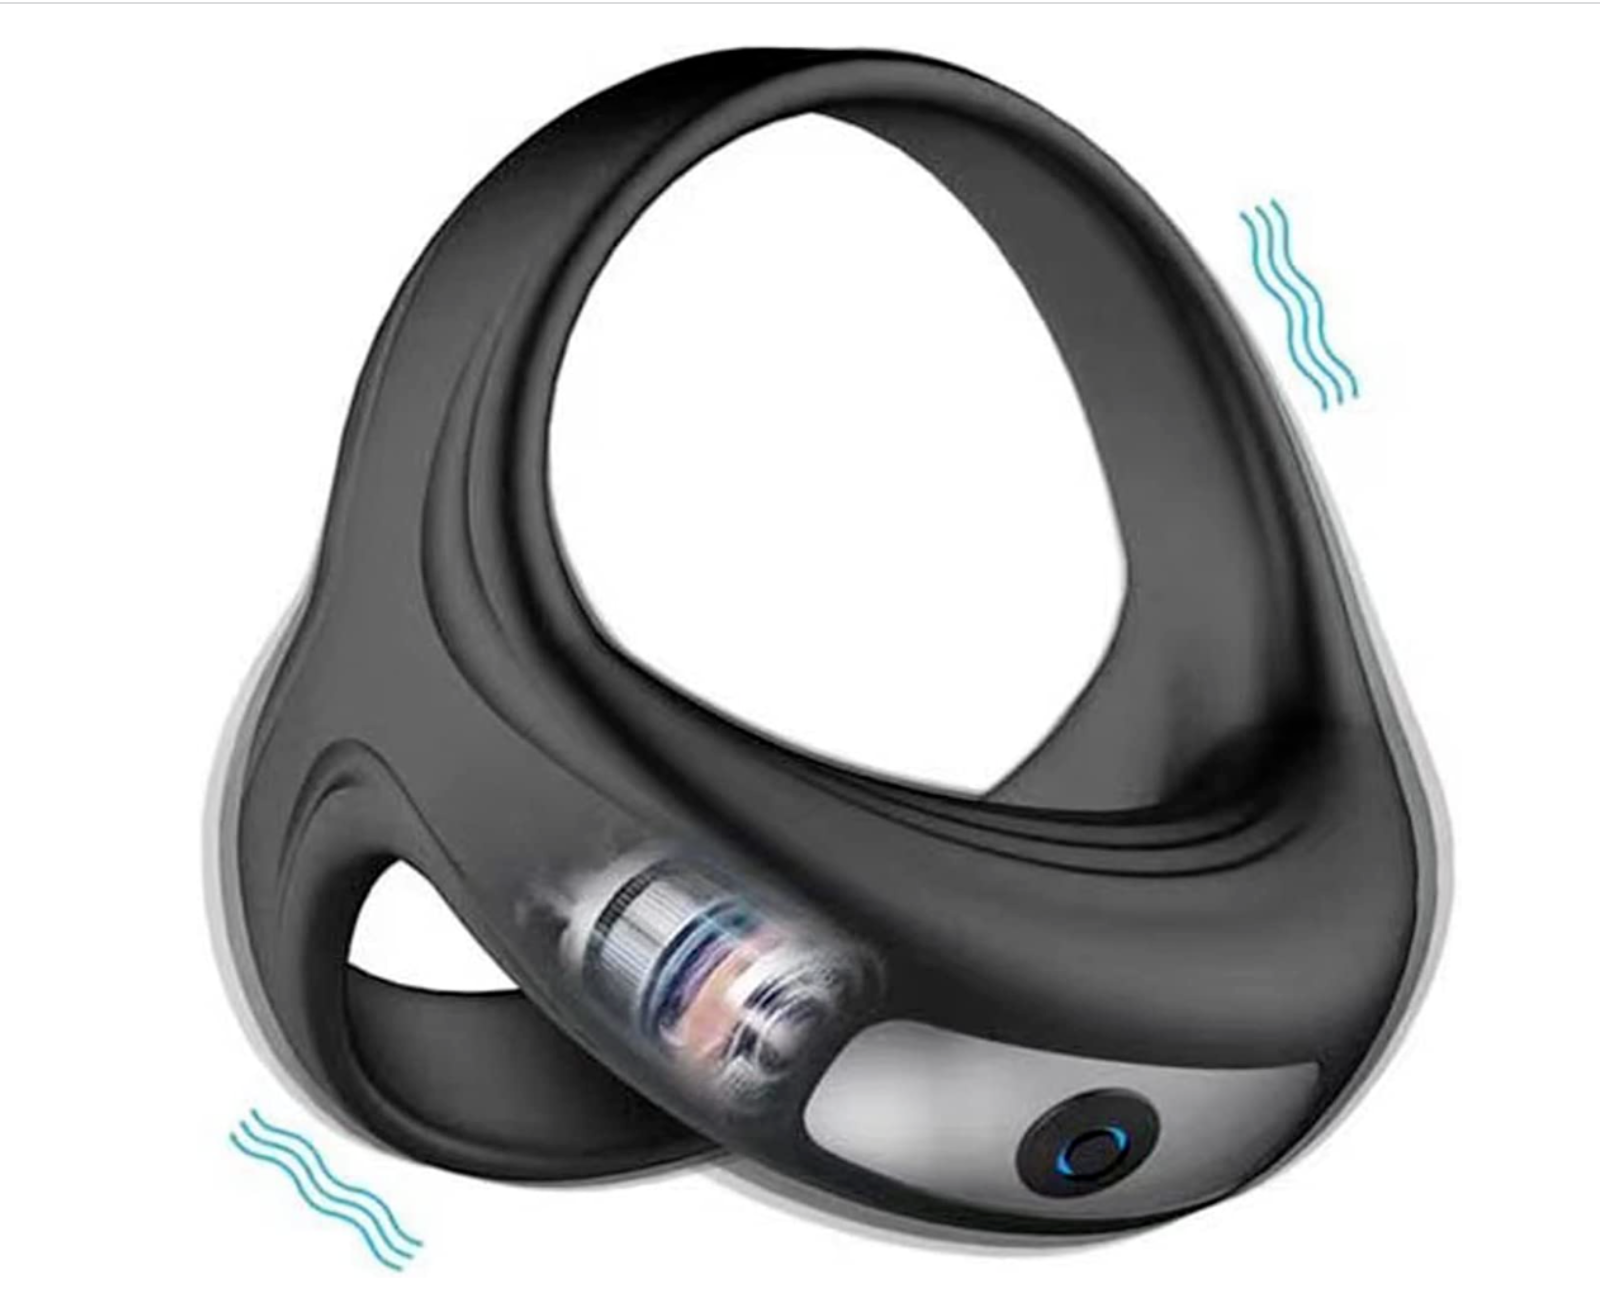 10 Speeds Remote Control Vibrating Cock Ring USB Rechargeable Penis Ring Sex Toy